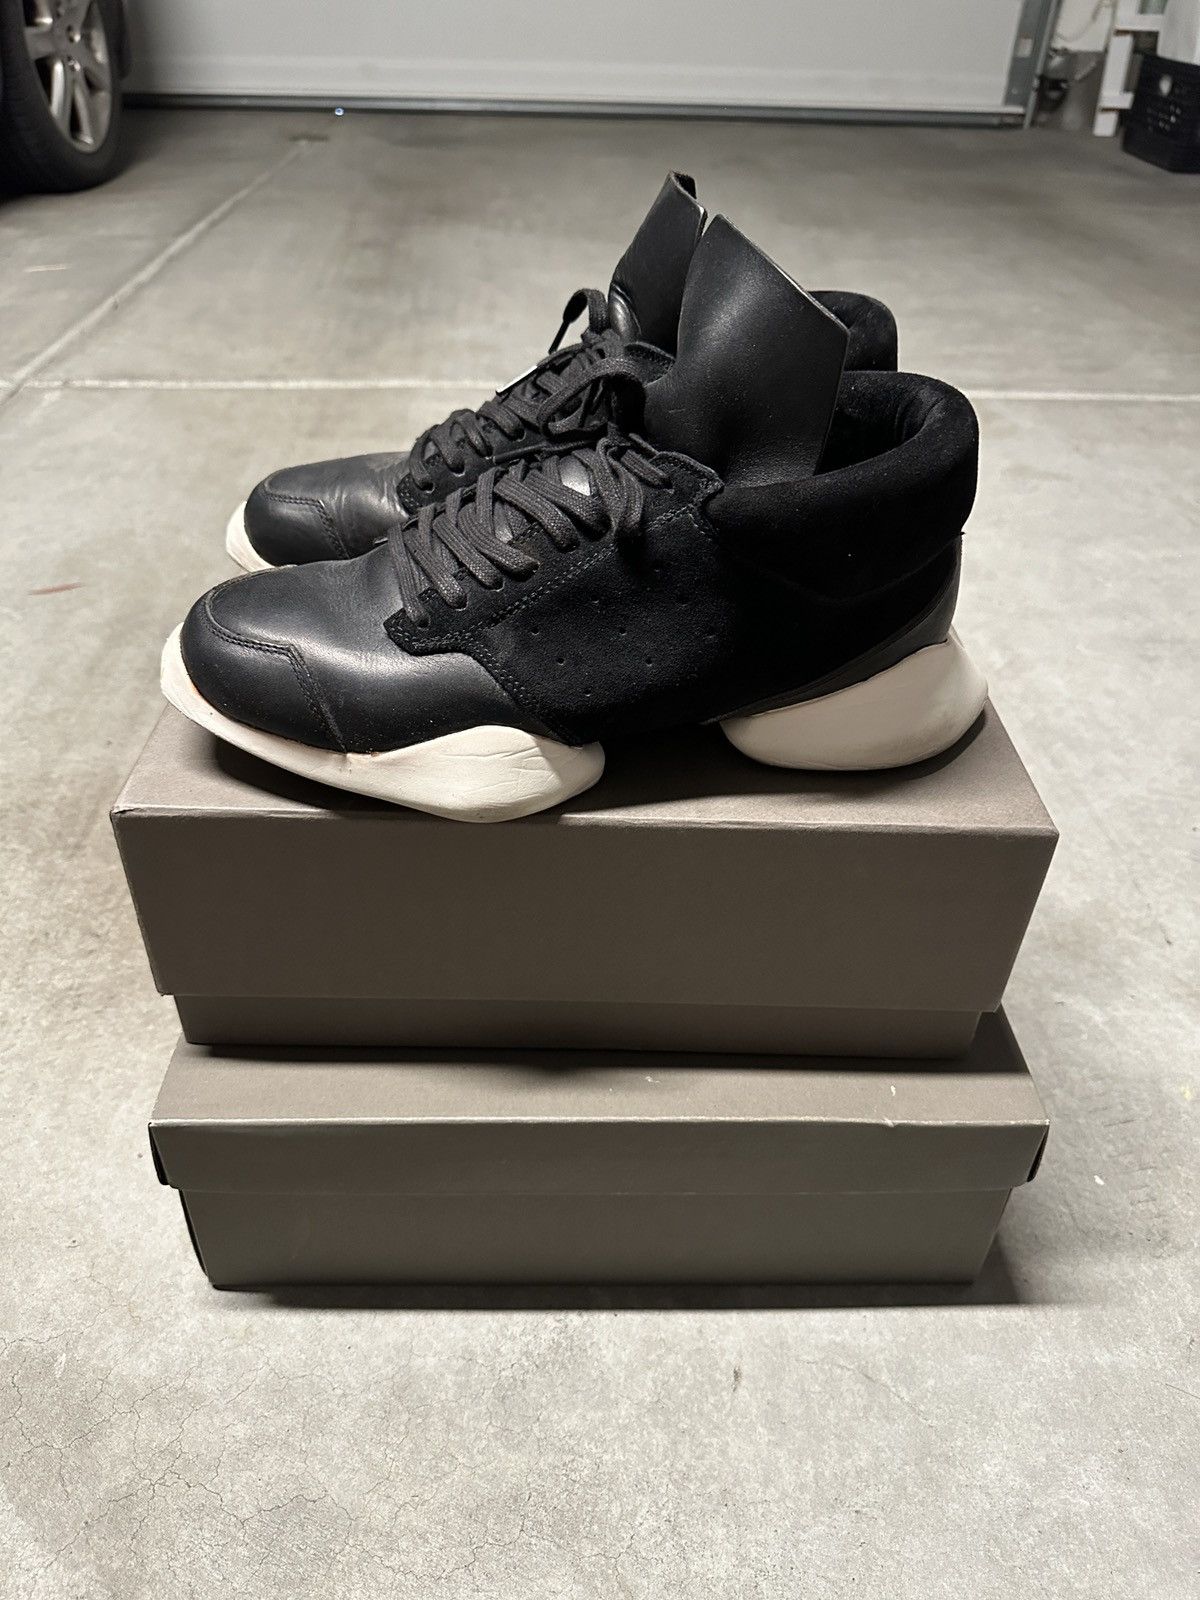 Adidas Rick Owens x Adidas Vicious Leather Tech Runner Runners Size US 10 / EU 43 - 1 Preview